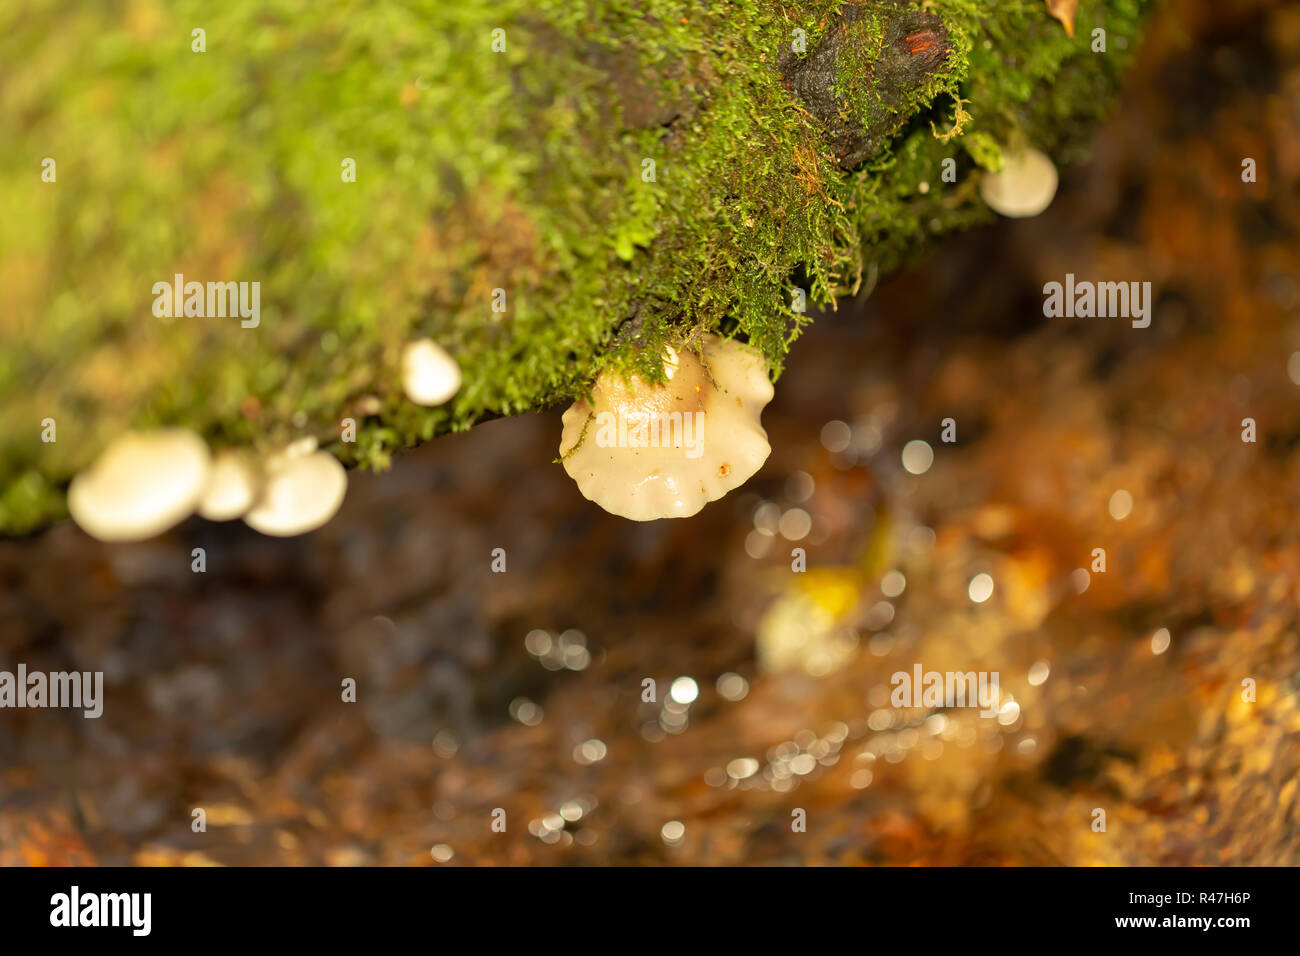 Photograph of Peeling Oysterling mushroom dangling above stream, shot with off camera flash Stock Photo